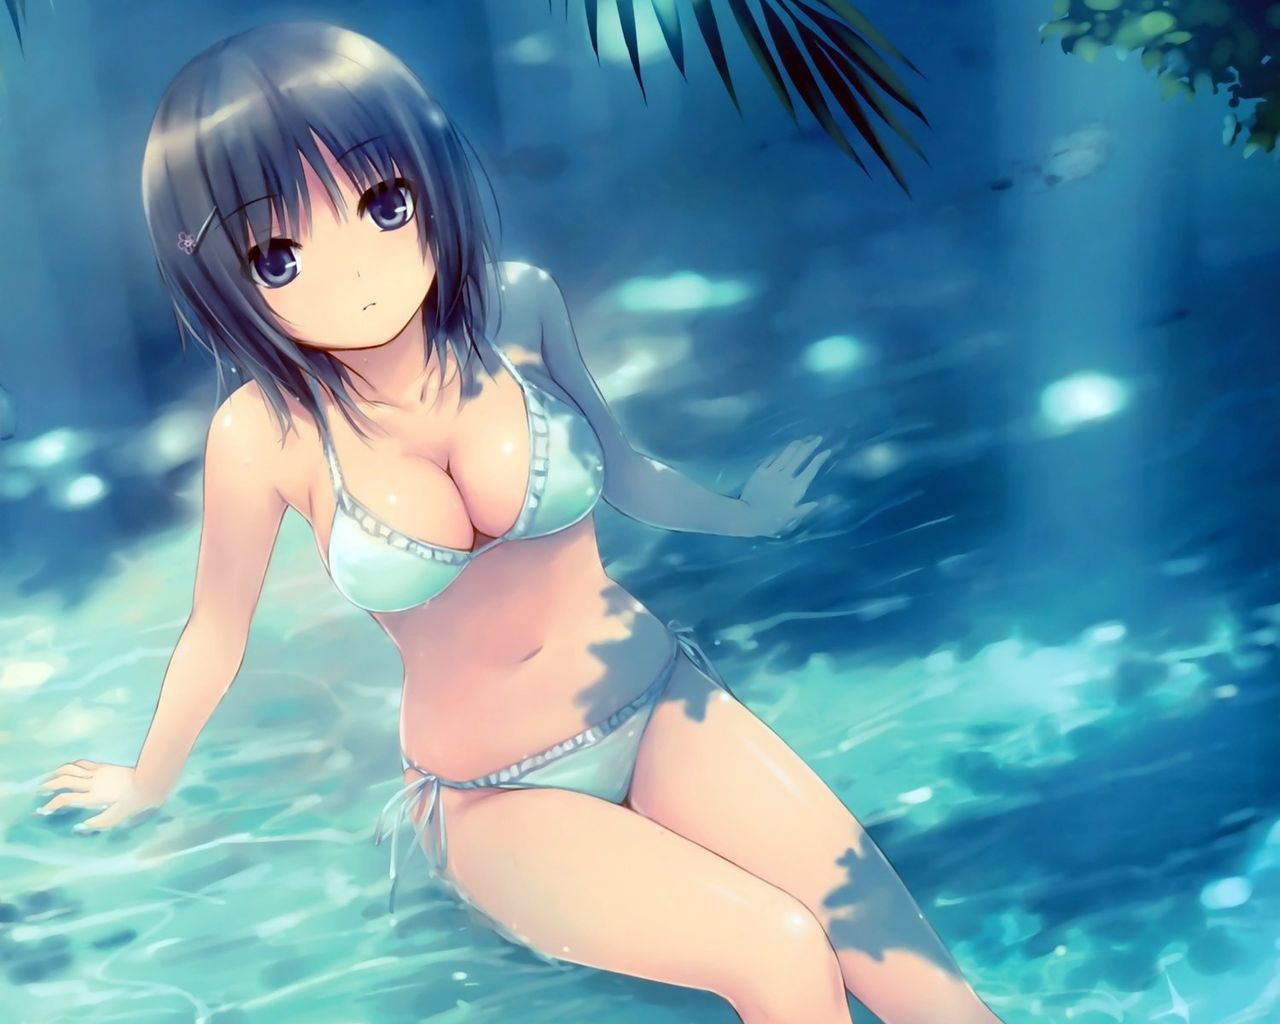 [2nd] Secondary image of a cute girl in swimsuit part 8 [swimsuit, non-erotic] 11